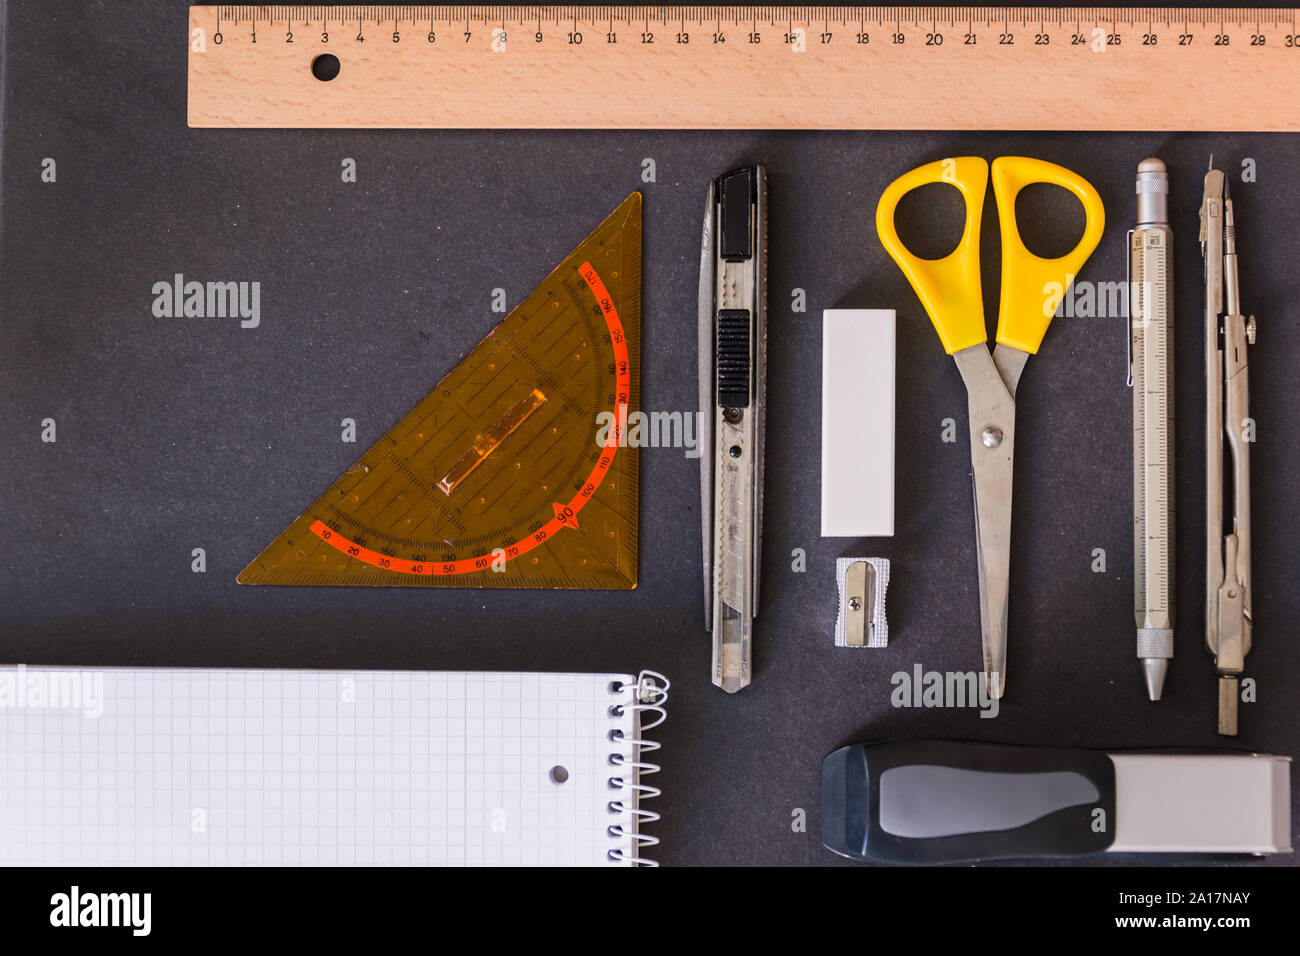 Back to school_School supplies for a fresh start Stock Photo